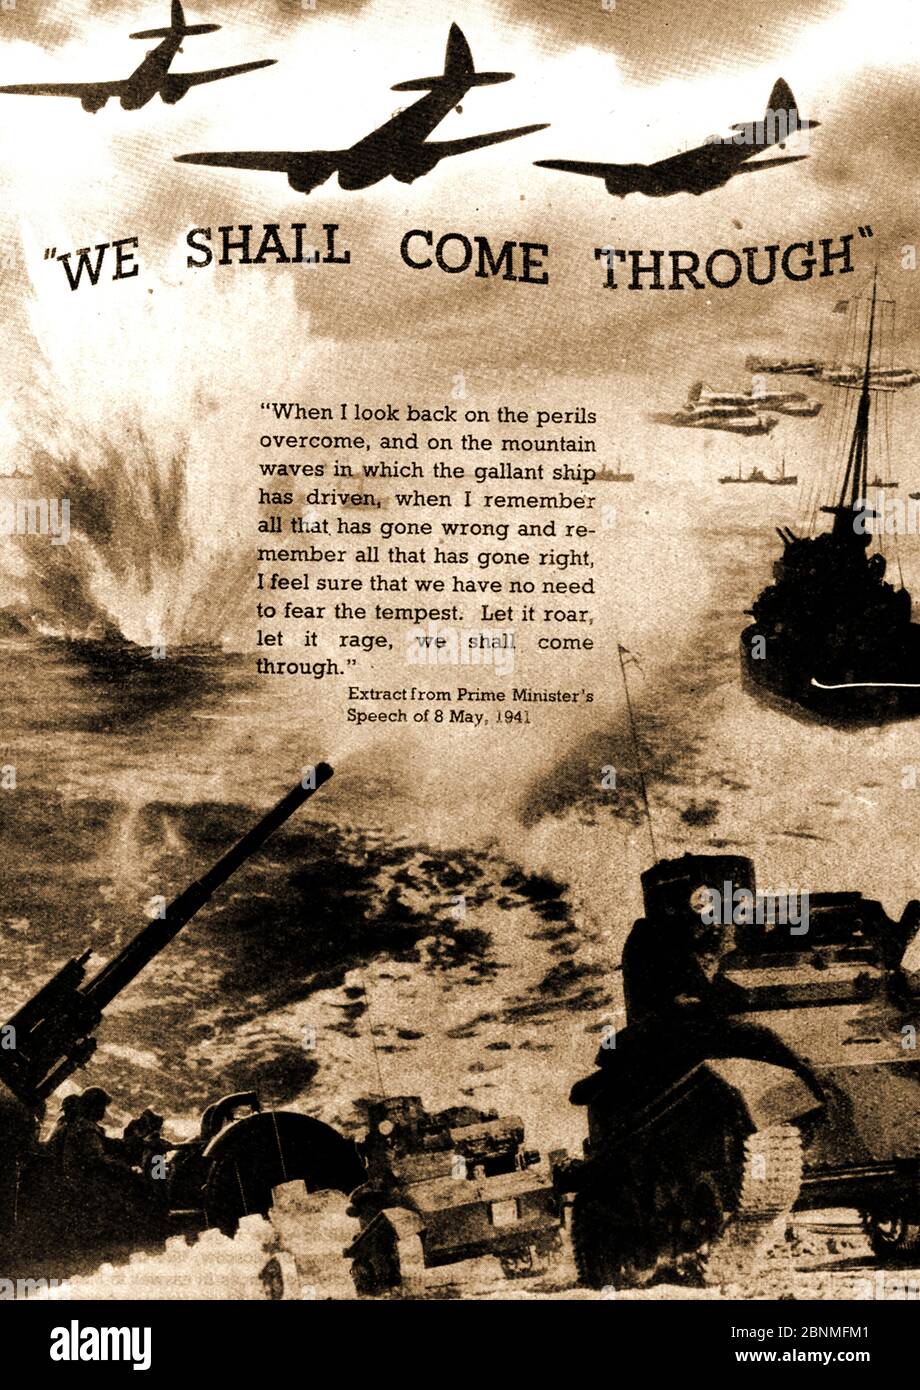 WWII -  A printed image from 1941 showing a  pictorial commemoration of Winston Churchill's speech of 8th May 1941 - 'We shall come through' Stock Photo